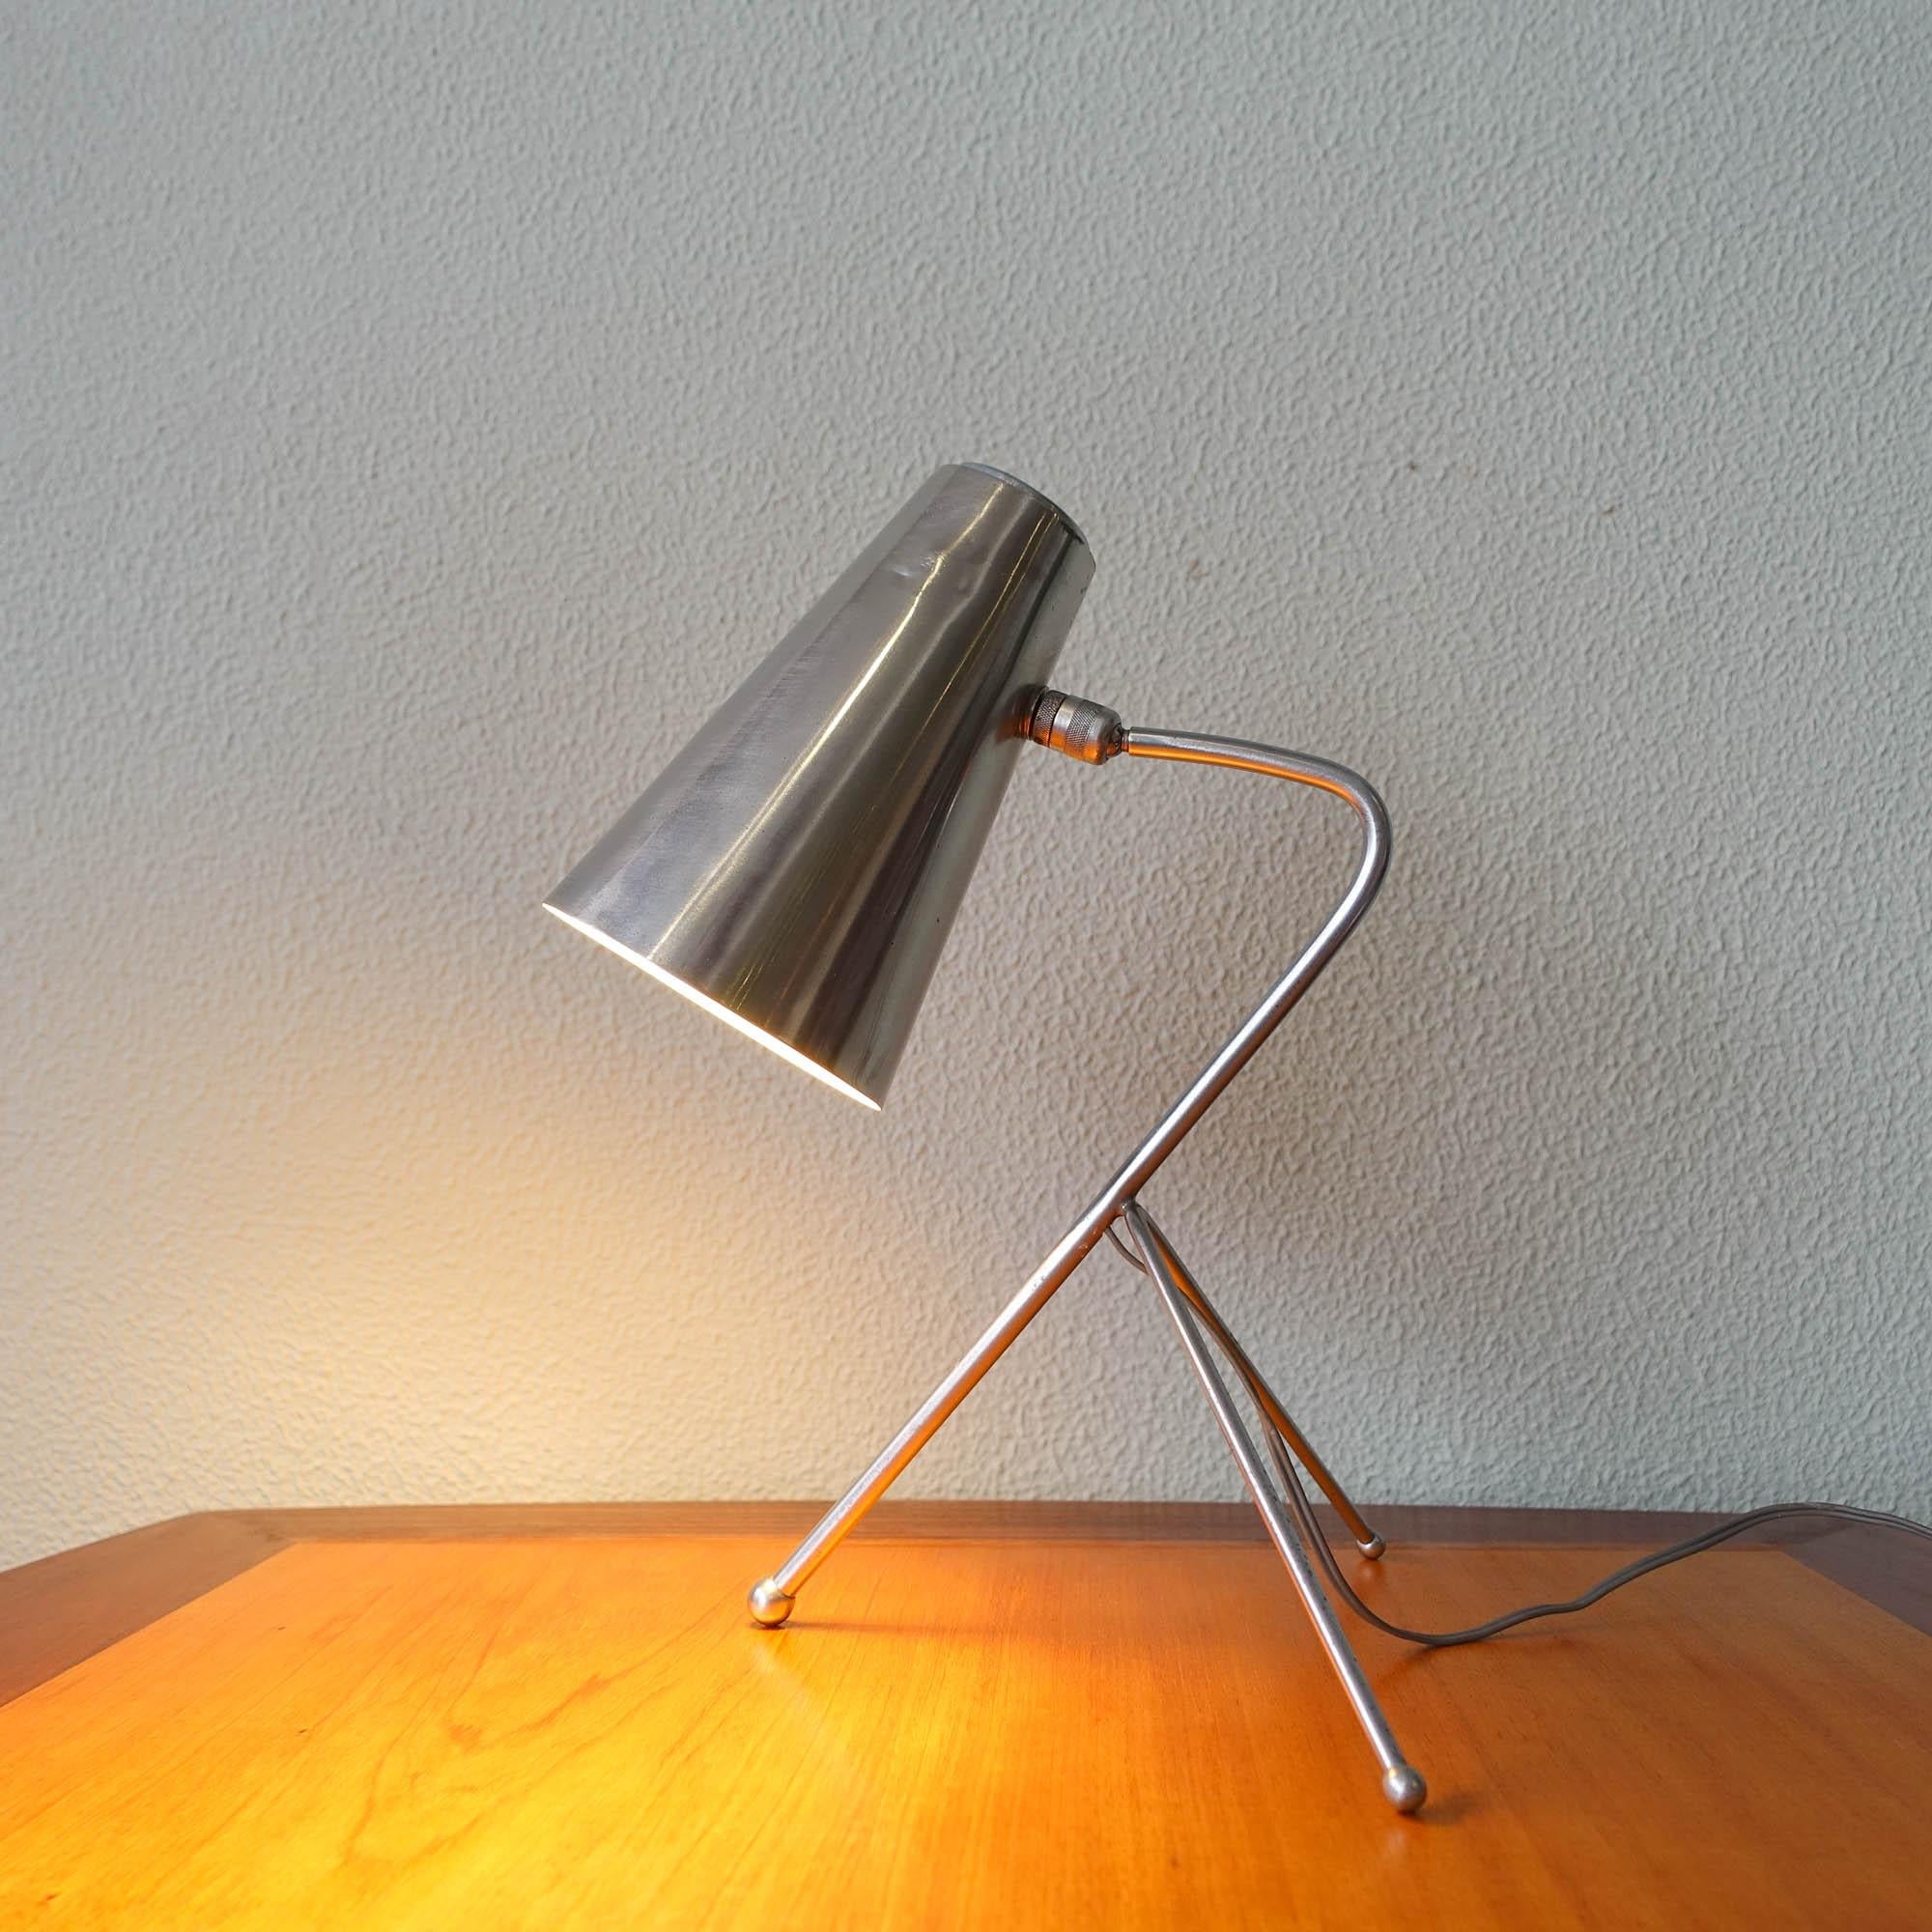 This desk lamp was designed and produced in Italy, during the 1950's. It has an elegant design with a tripod base and an aluminum lamp shade. The lamp shade is articulated so you can position it in various ways. In original and good vintage